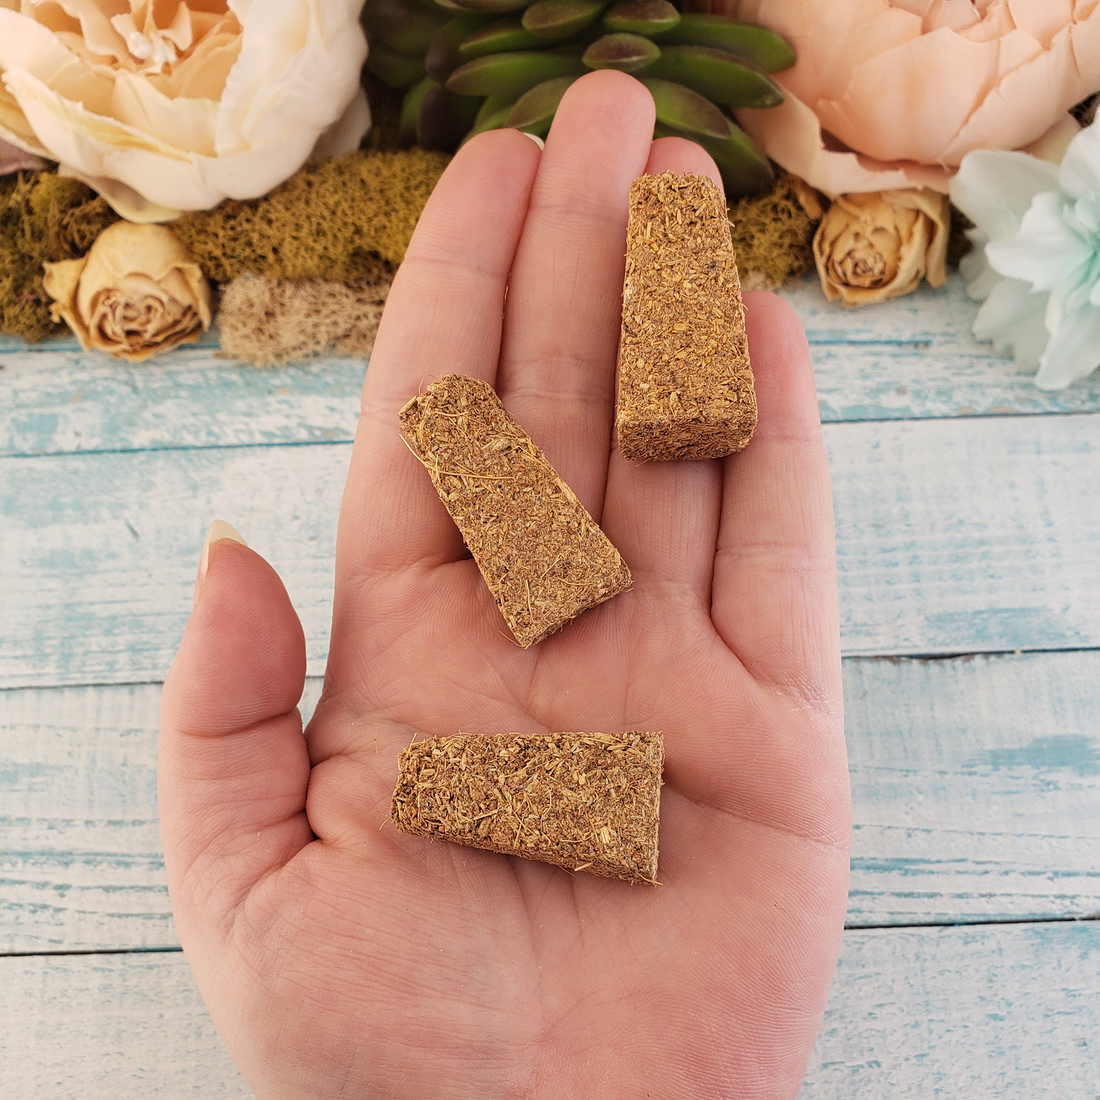 Palo Santo Incense Cone | Handmade Cone Incense for Home Cleansing | 100% Natural - In Hand 3